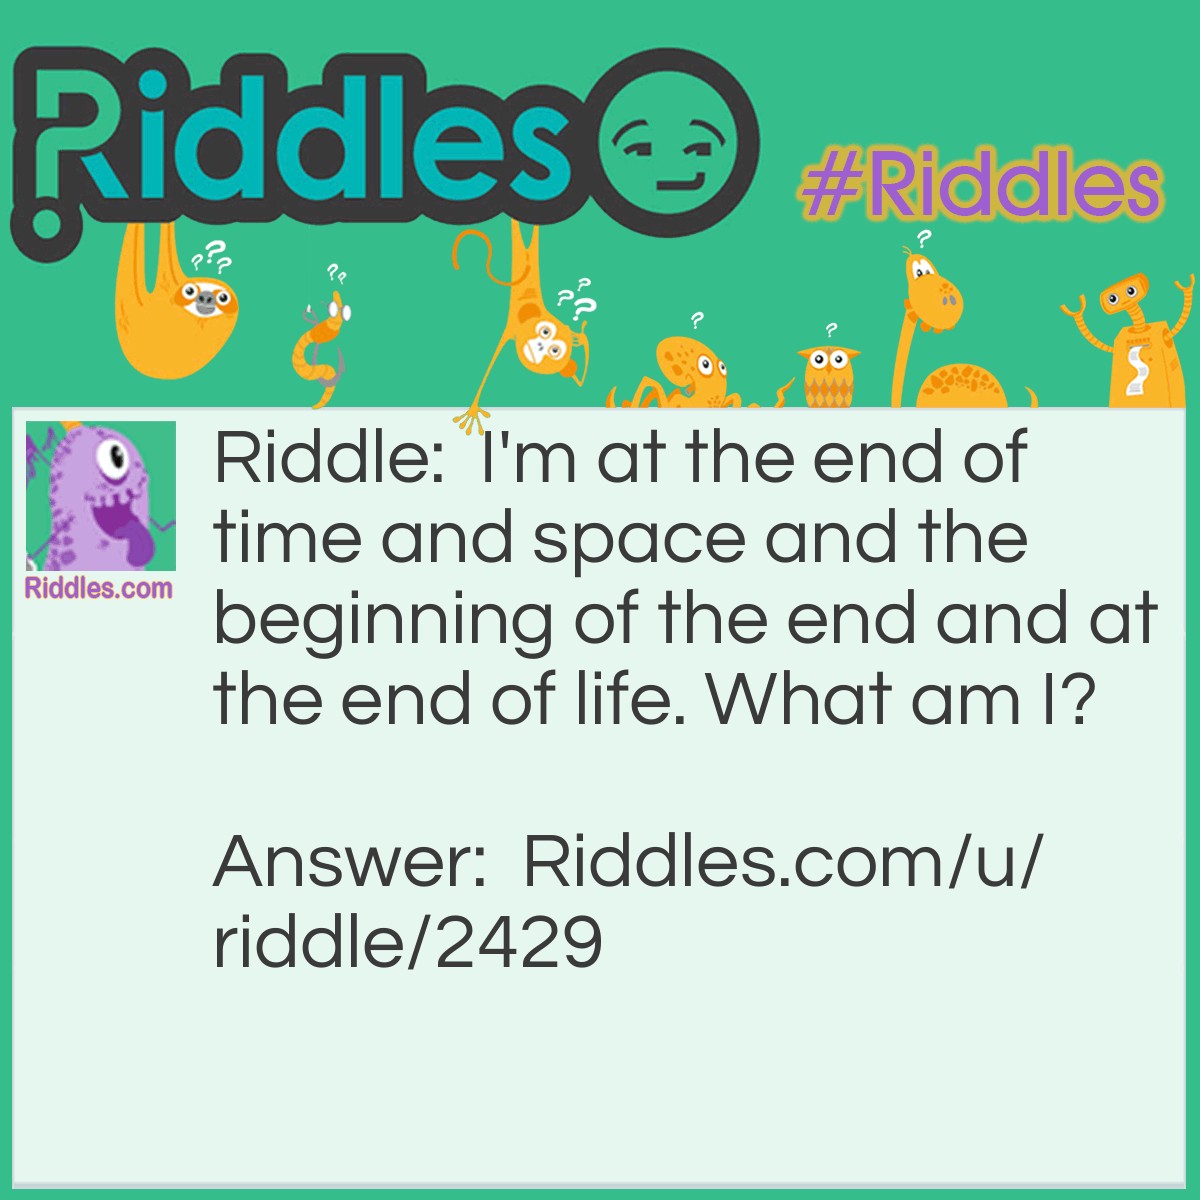 Riddle: I'm at the end of time and space and the beginning of the end and at the end of life. What am I? Answer: The letter E.